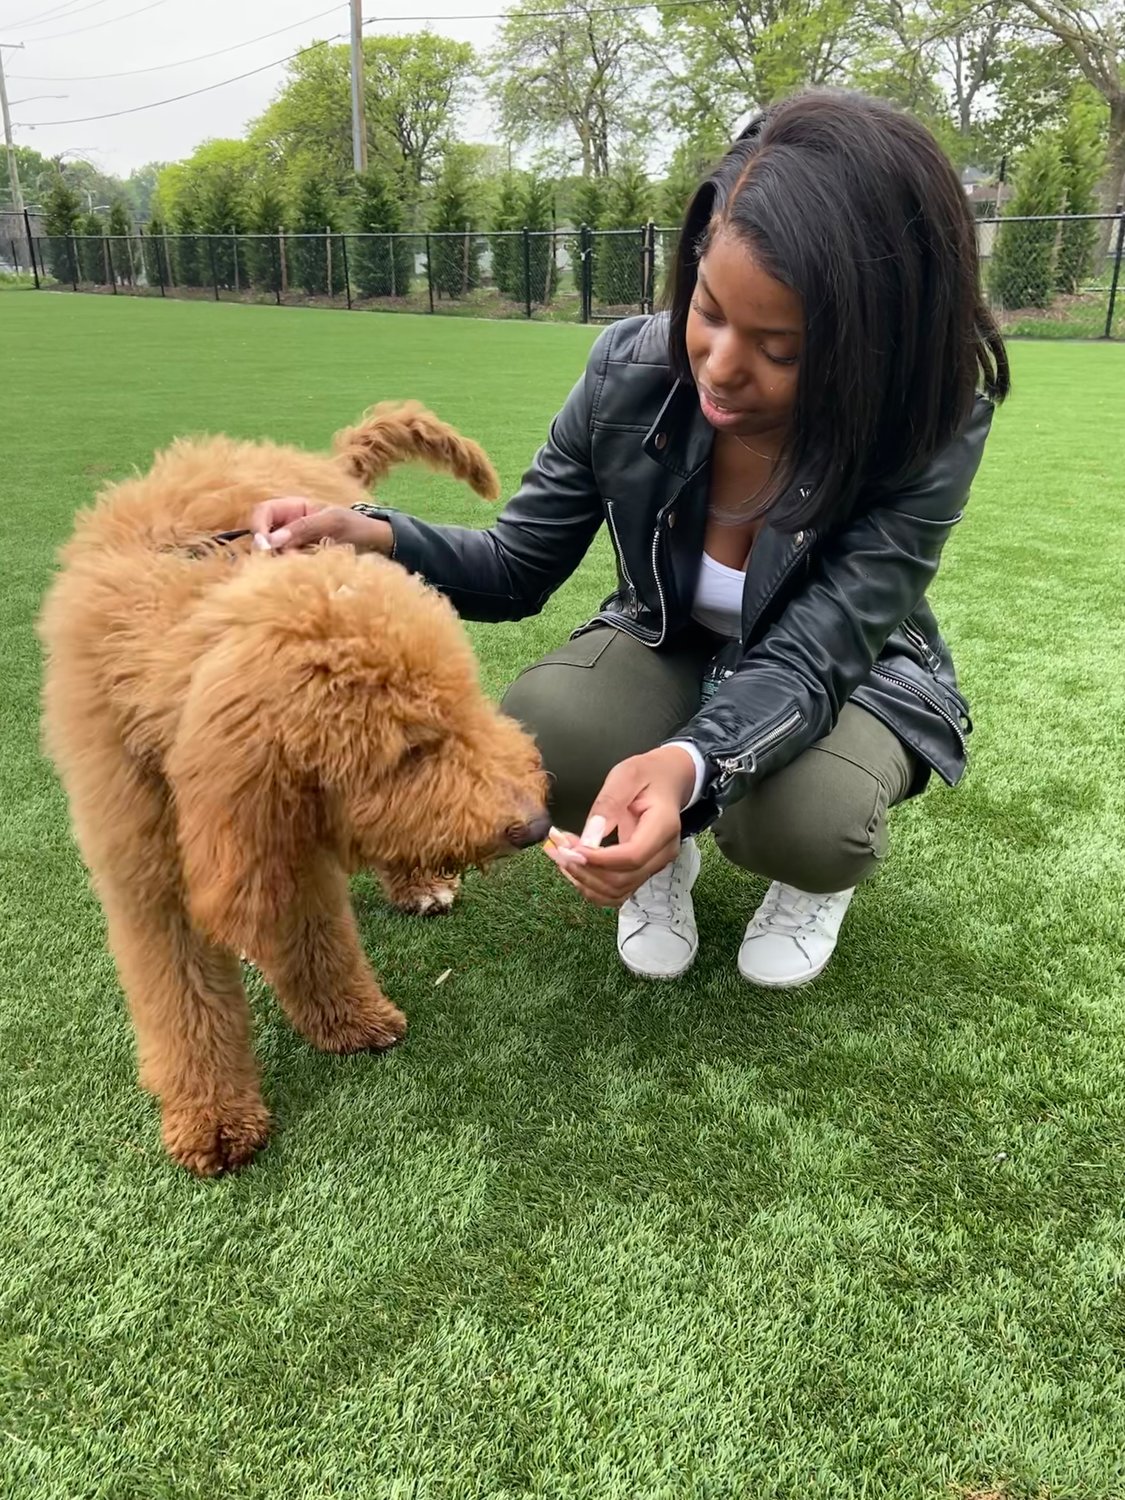 Vanessa Celissaint brought her dog Niko all the way from Queens to experience Eisenhower Park’s dog park.